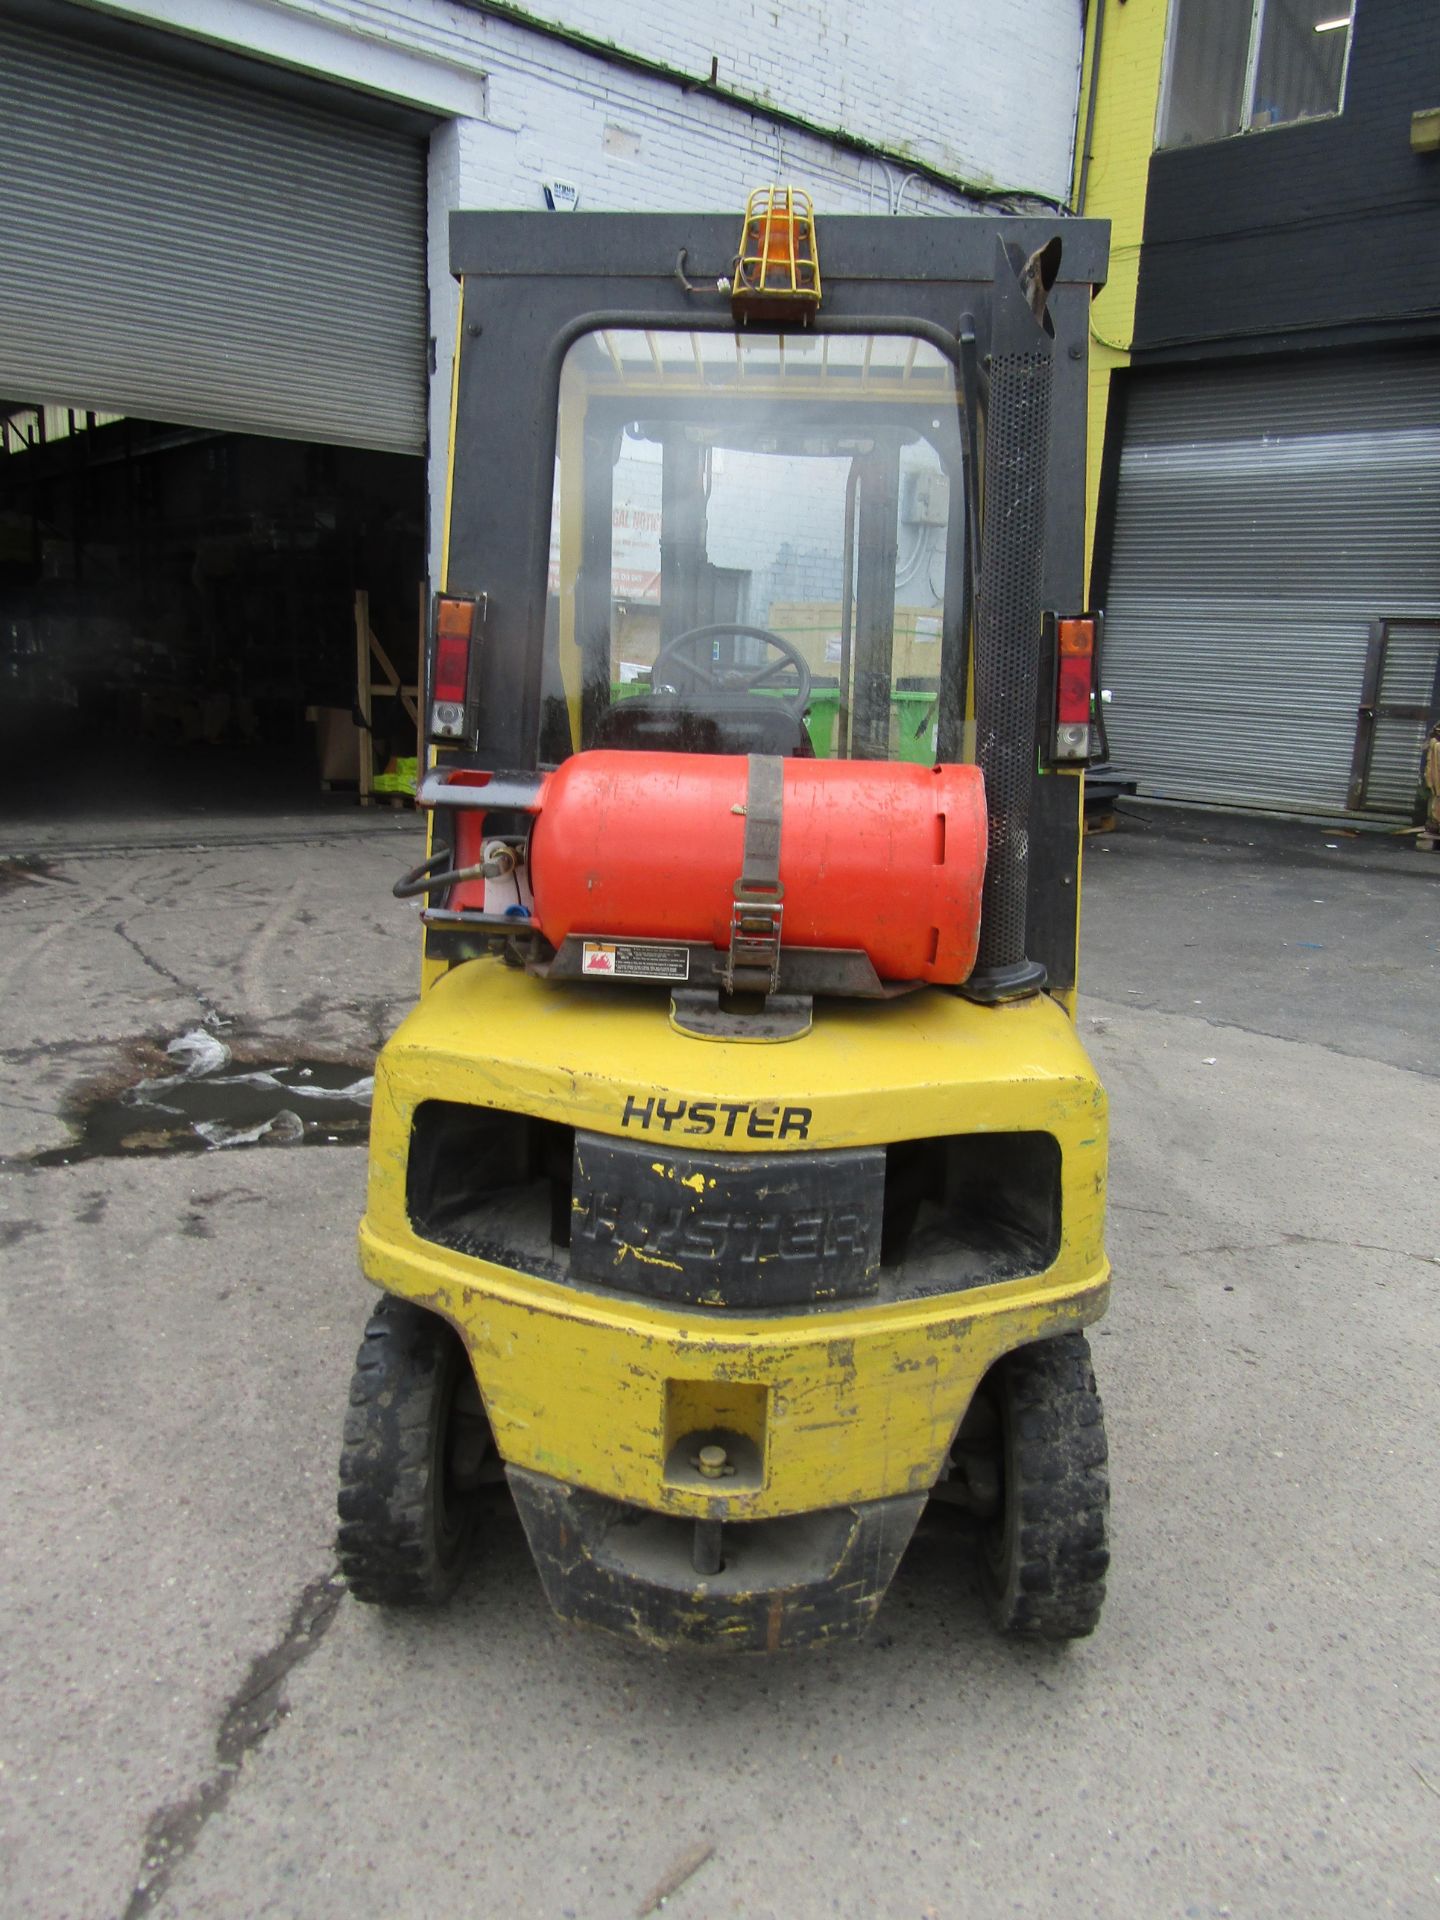 Hyster H2.00Xm Forklift Truck 7235 hours currently manufactured in 2004, has a roof as well as front - Bild 2 aus 12